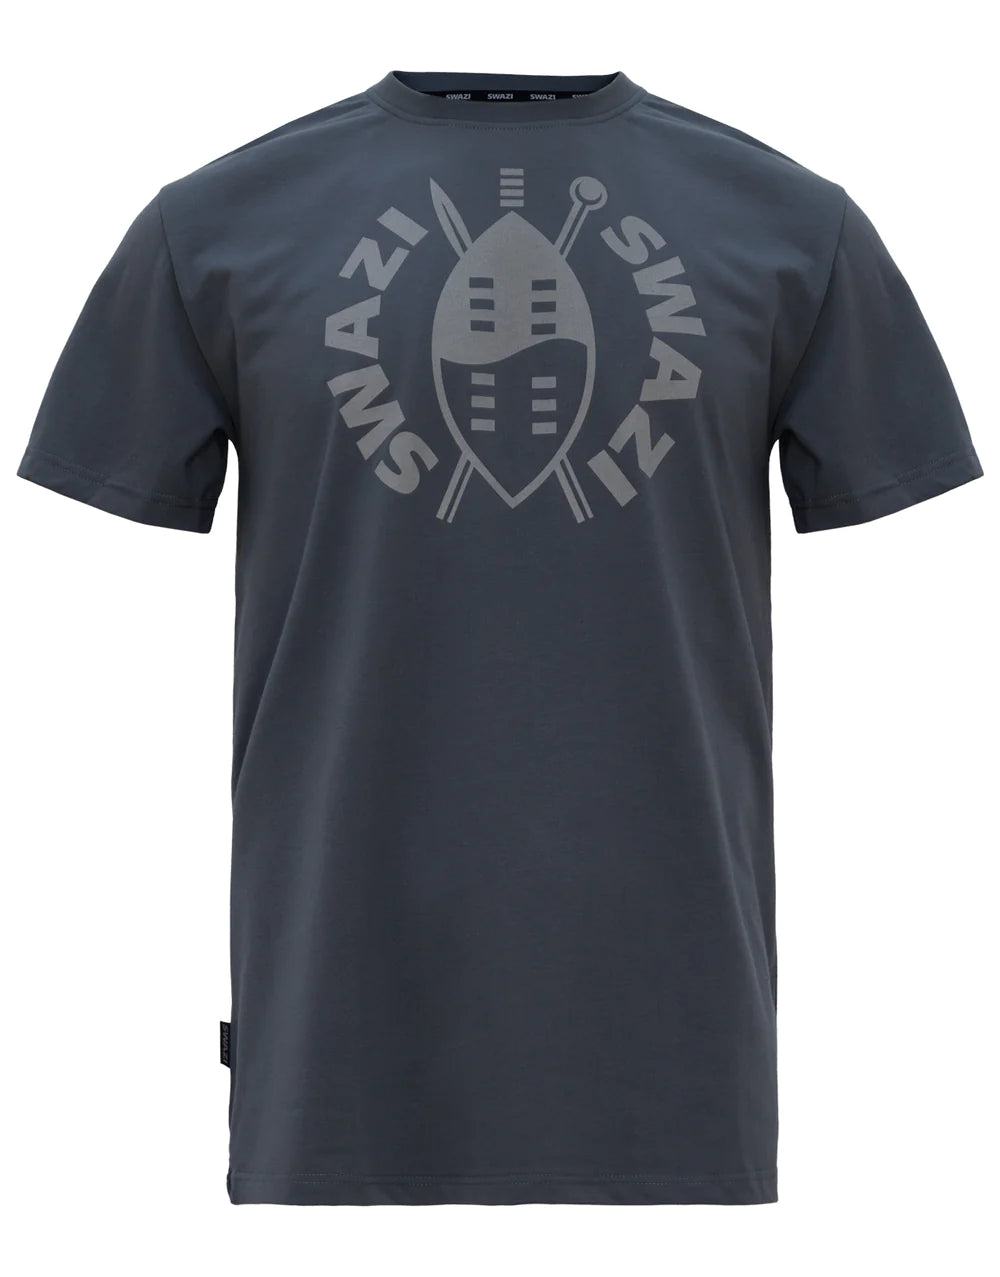 Swazi Clan Tee - S / STORM - Mansfield Hunting & Fishing - Products to prepare for Corona Virus